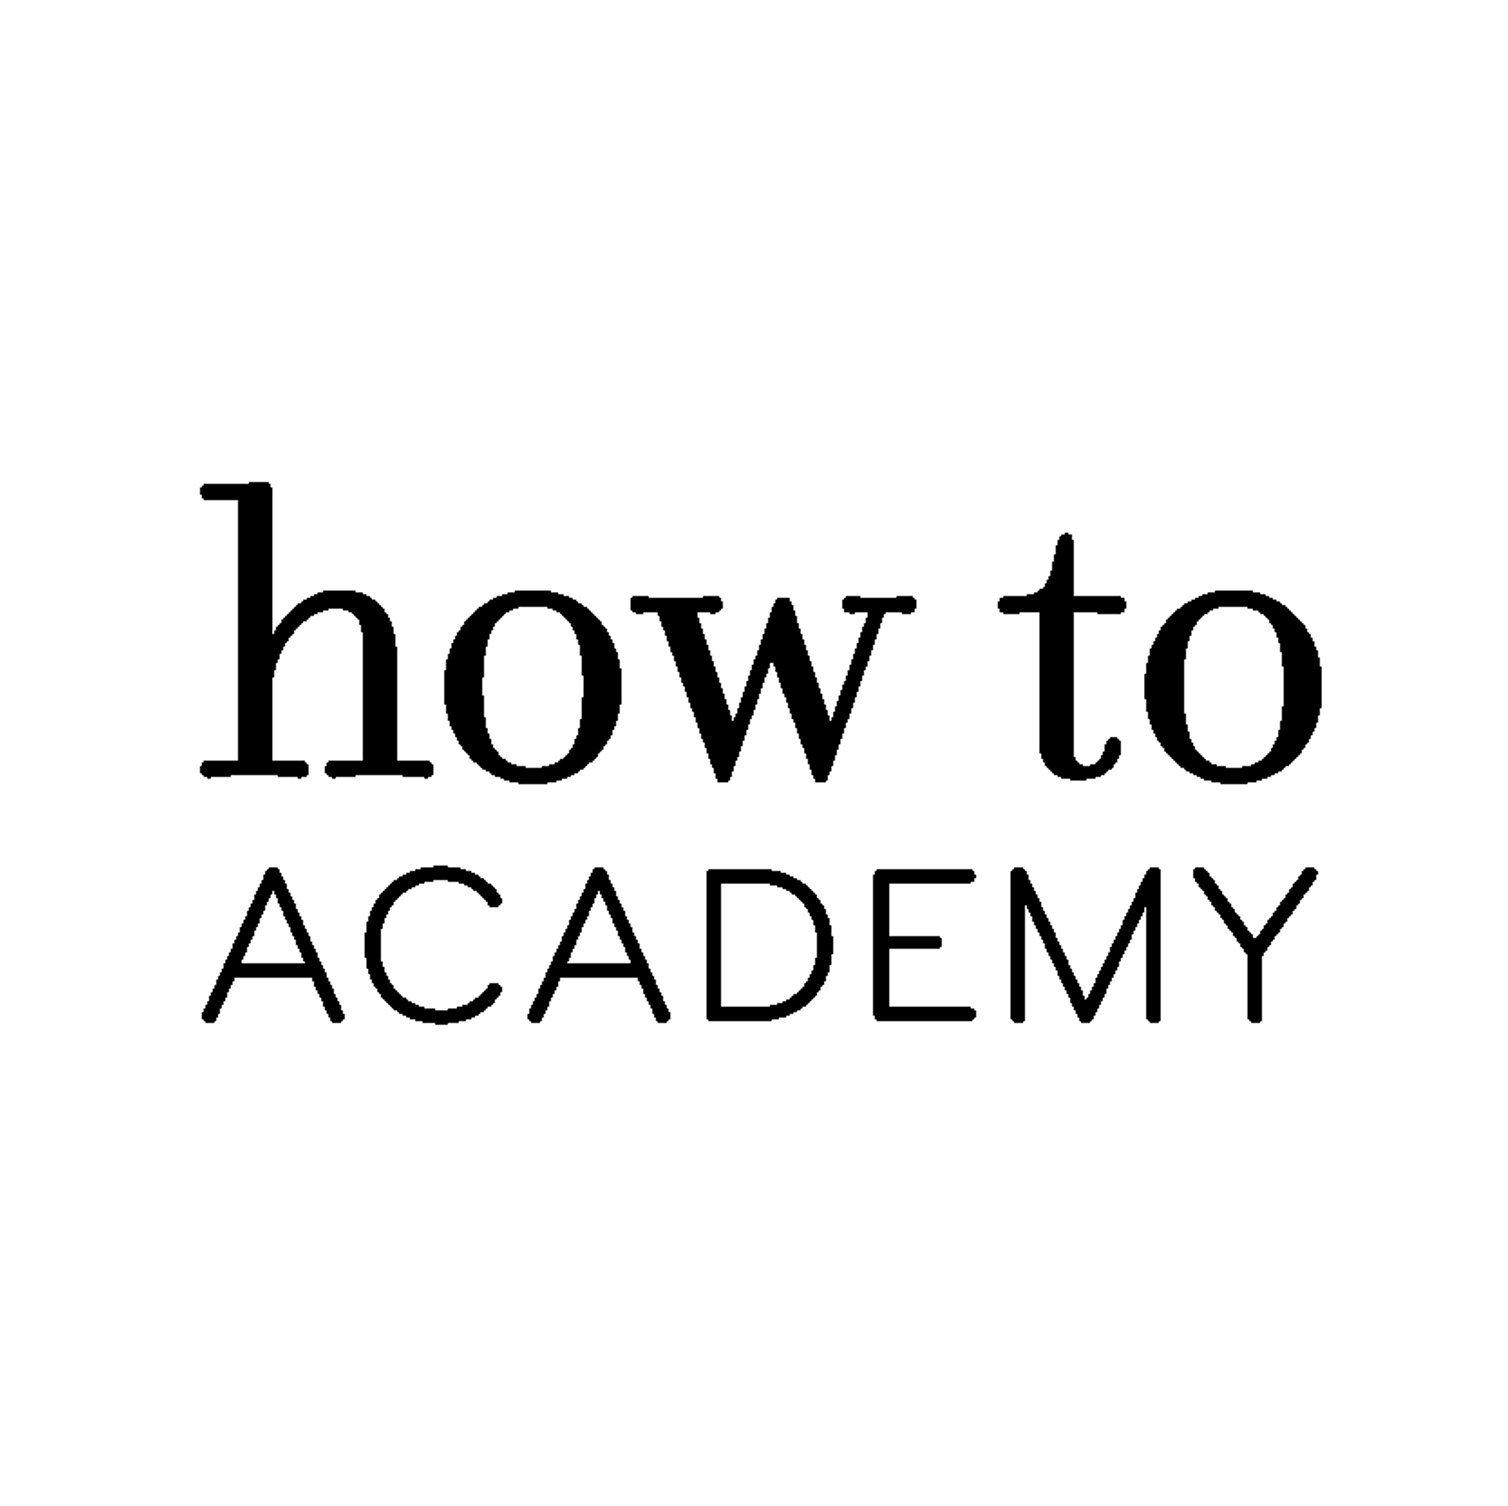 how to: Academy